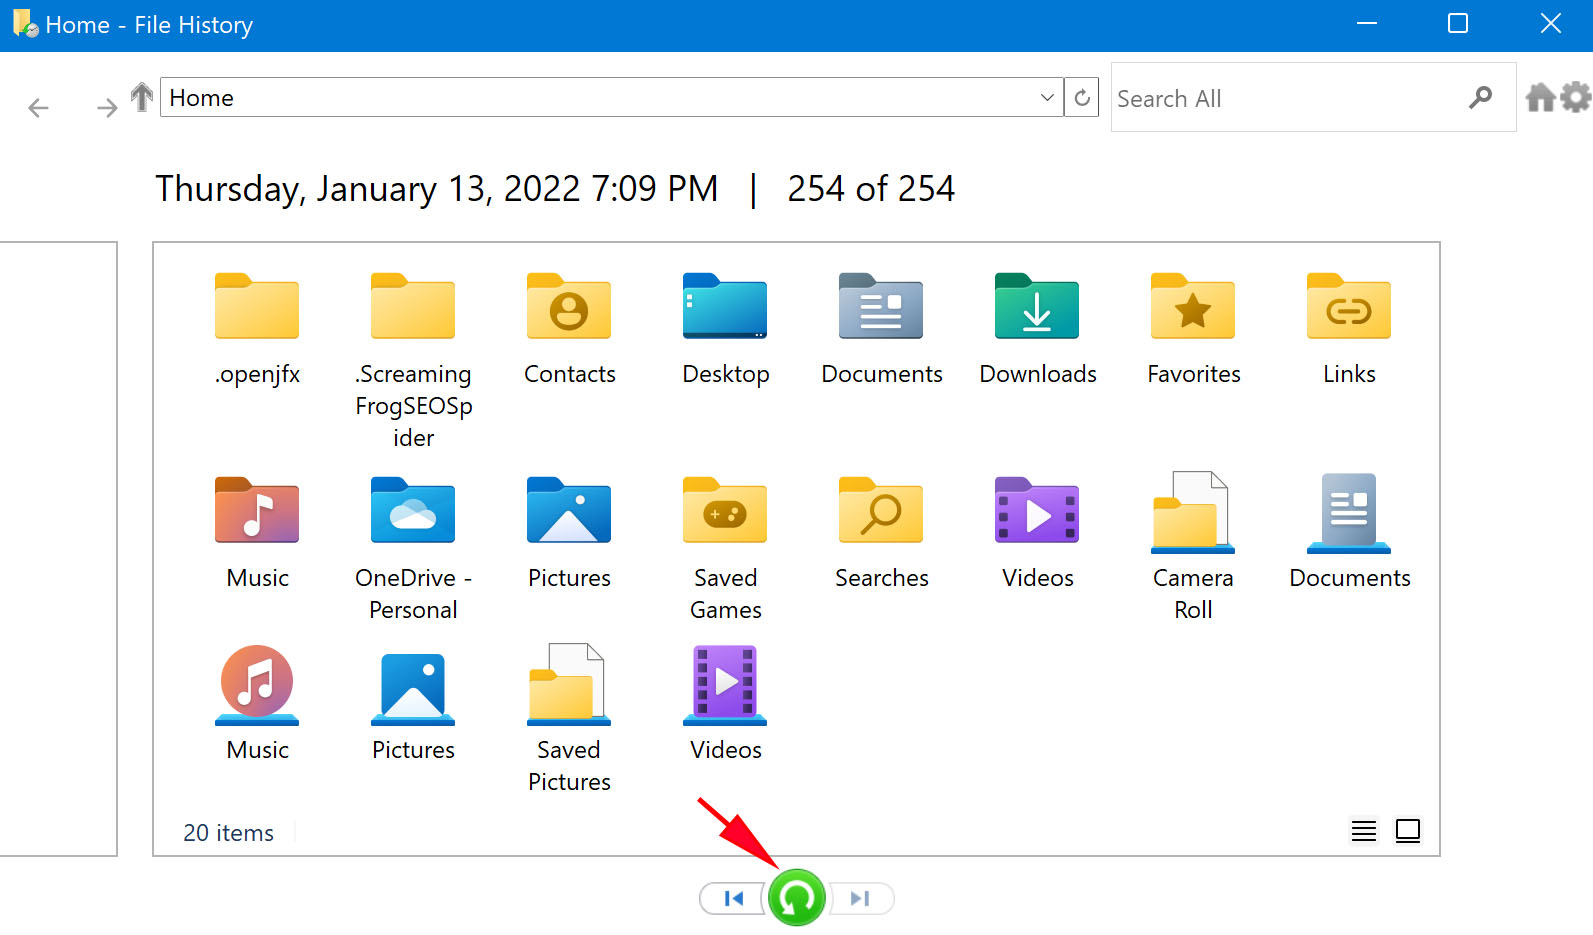 Recover deleted files on Windows 10 from recycle bin with File History Backup feature